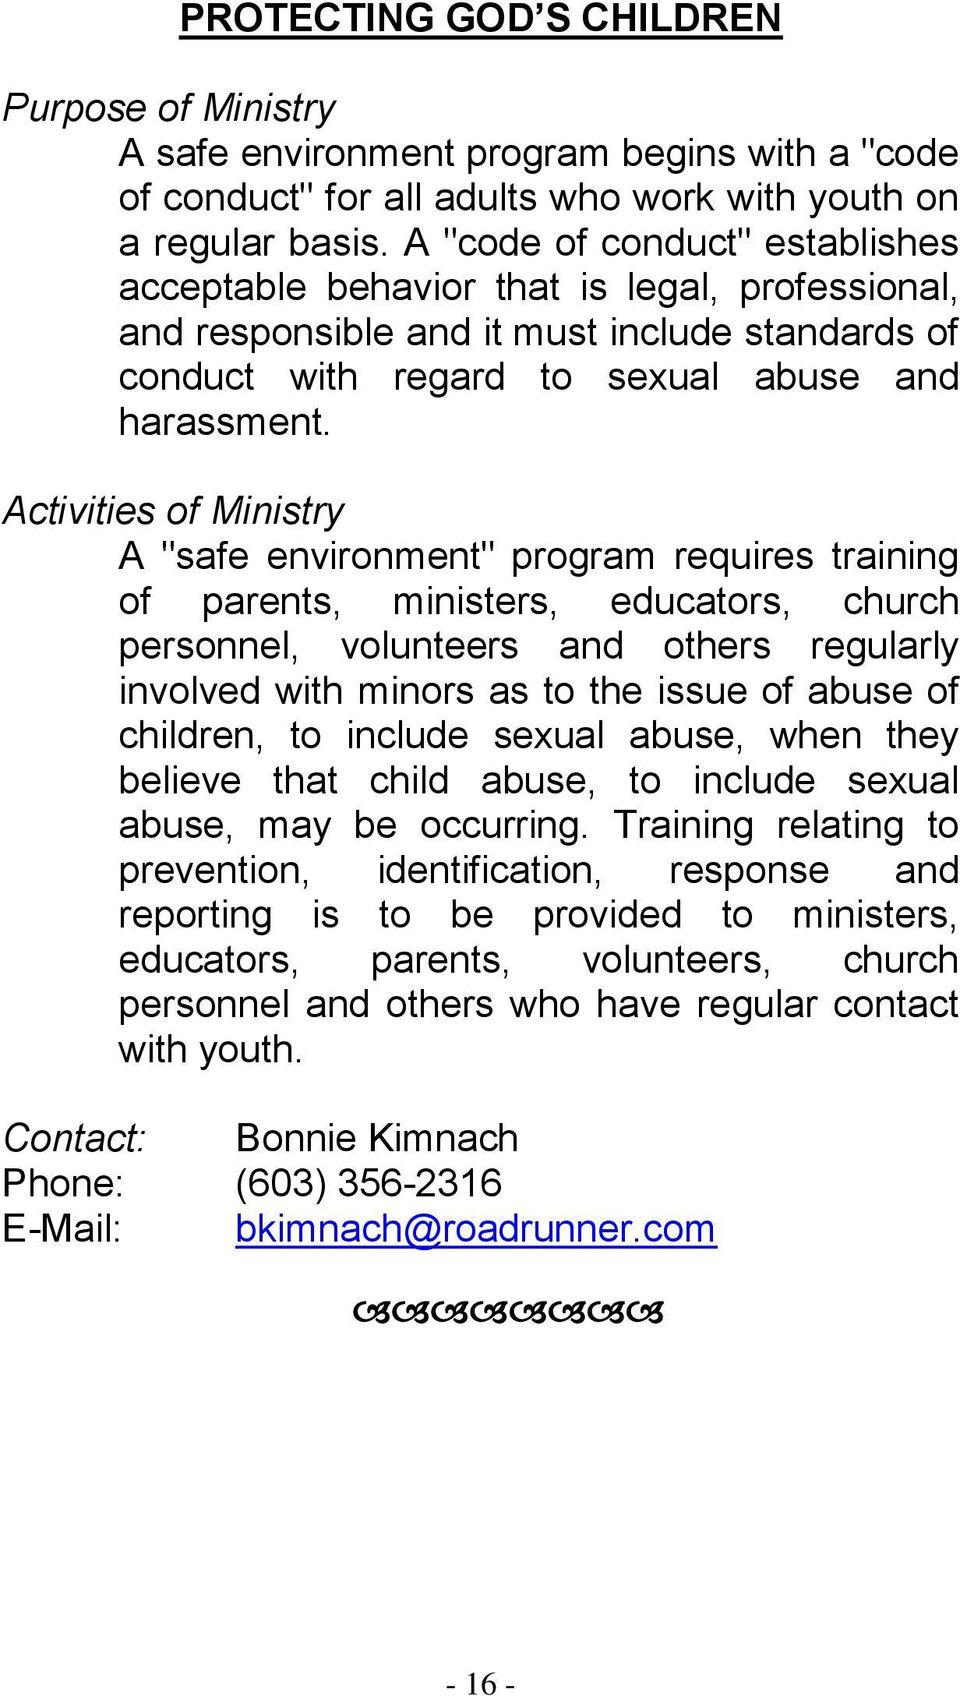 A "safe environment" program requires training of parents, ministers, educators, church personnel, volunteers and others regularly involved with minors as to the issue of abuse of children, to